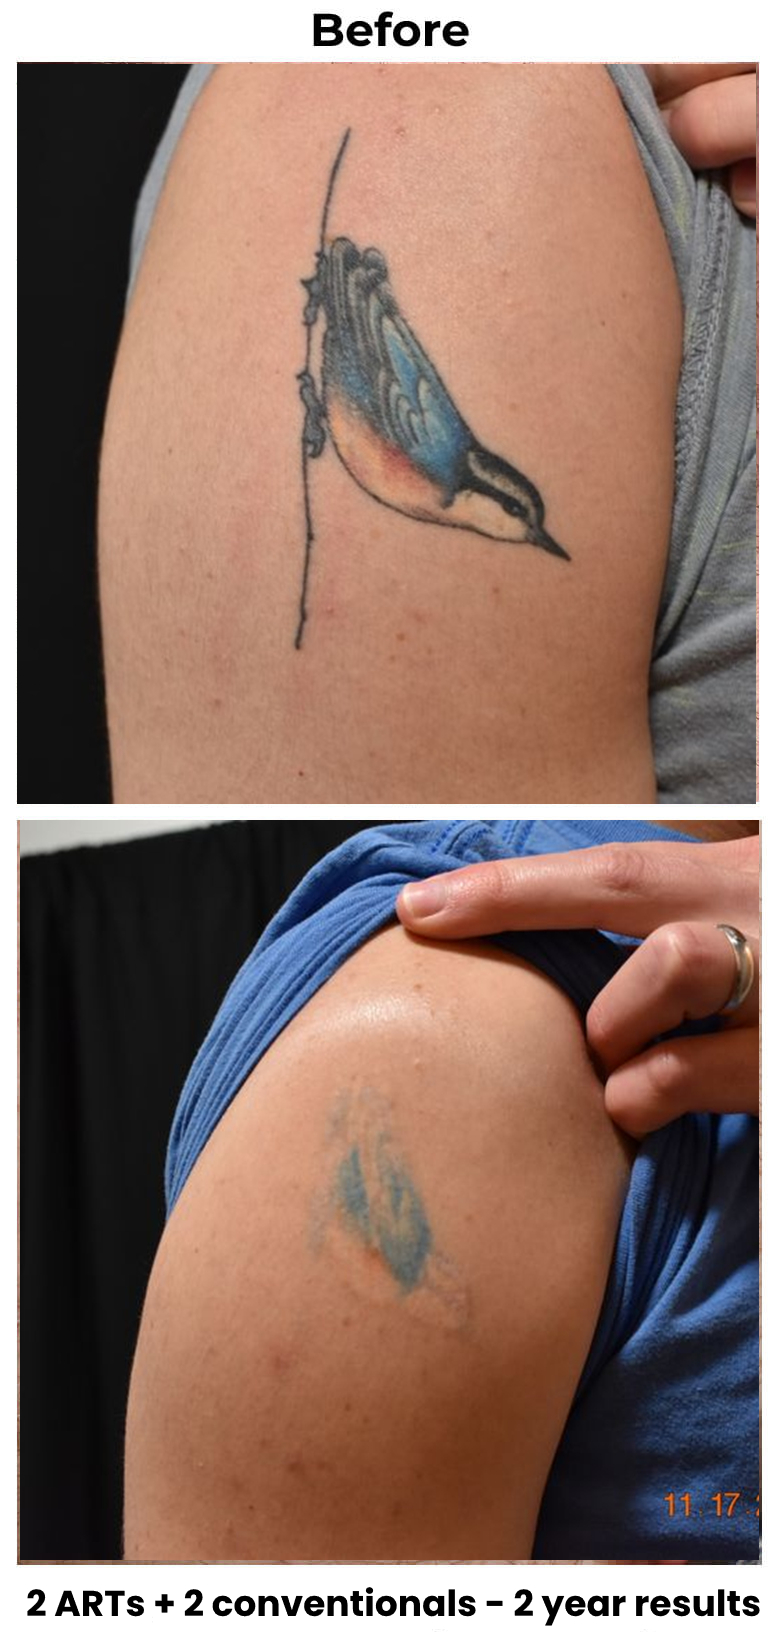  Accelerated tattoo removal treatments